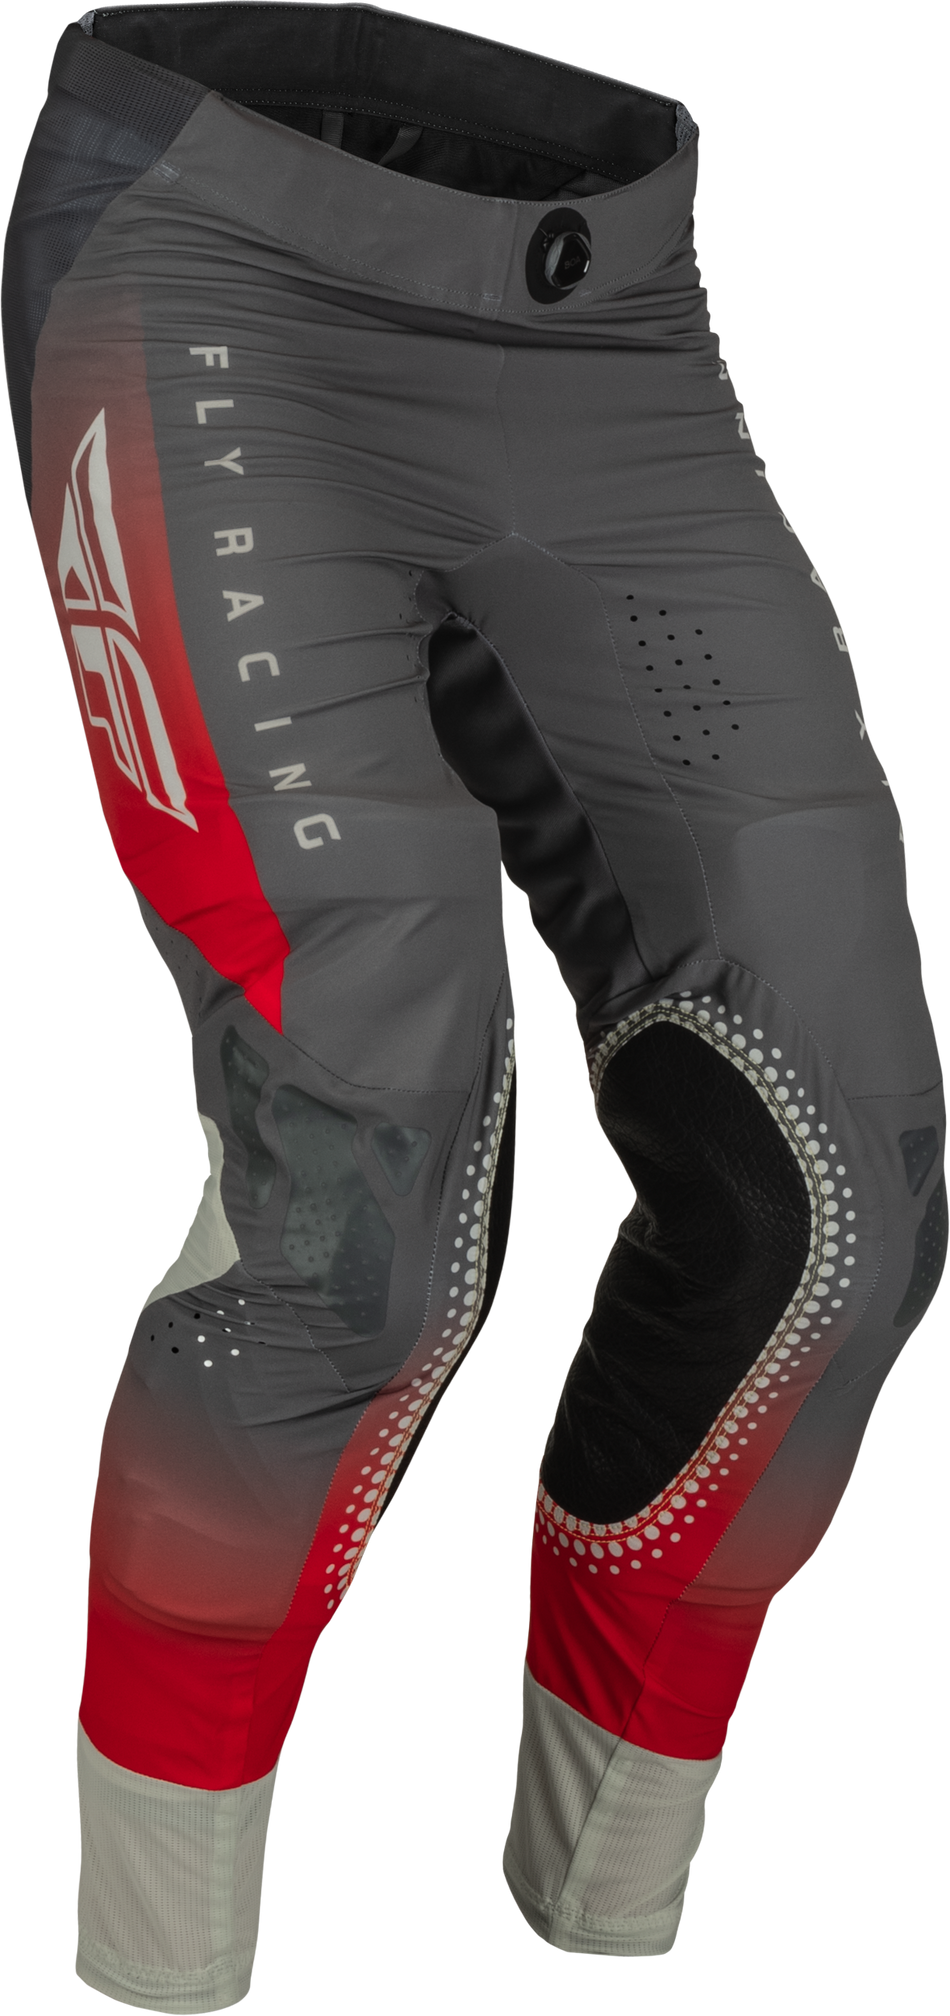 FLY RACING Youth Lite Pants Red/Grey Sz 26 376-73326